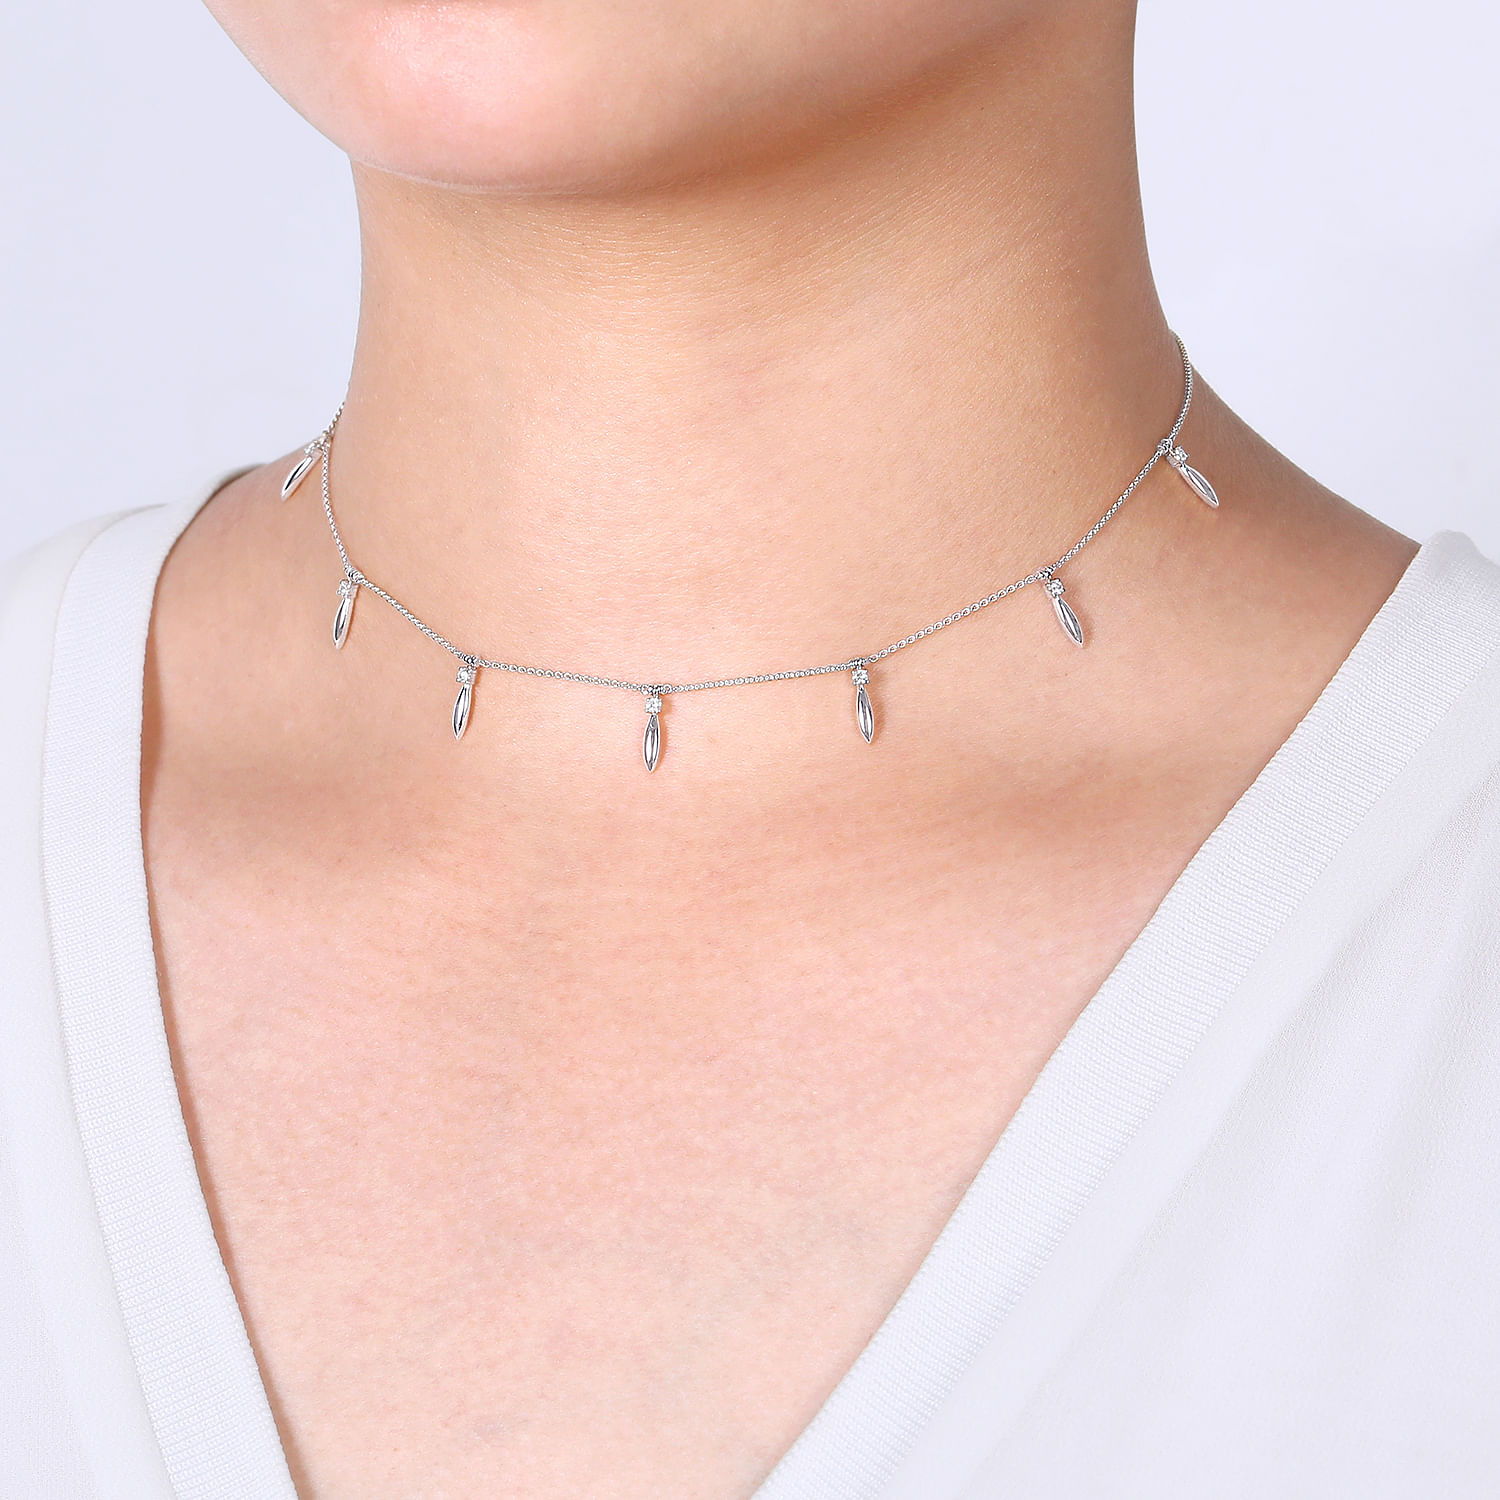 14K White Gold Choker Necklace with Diamond and Spike Drops